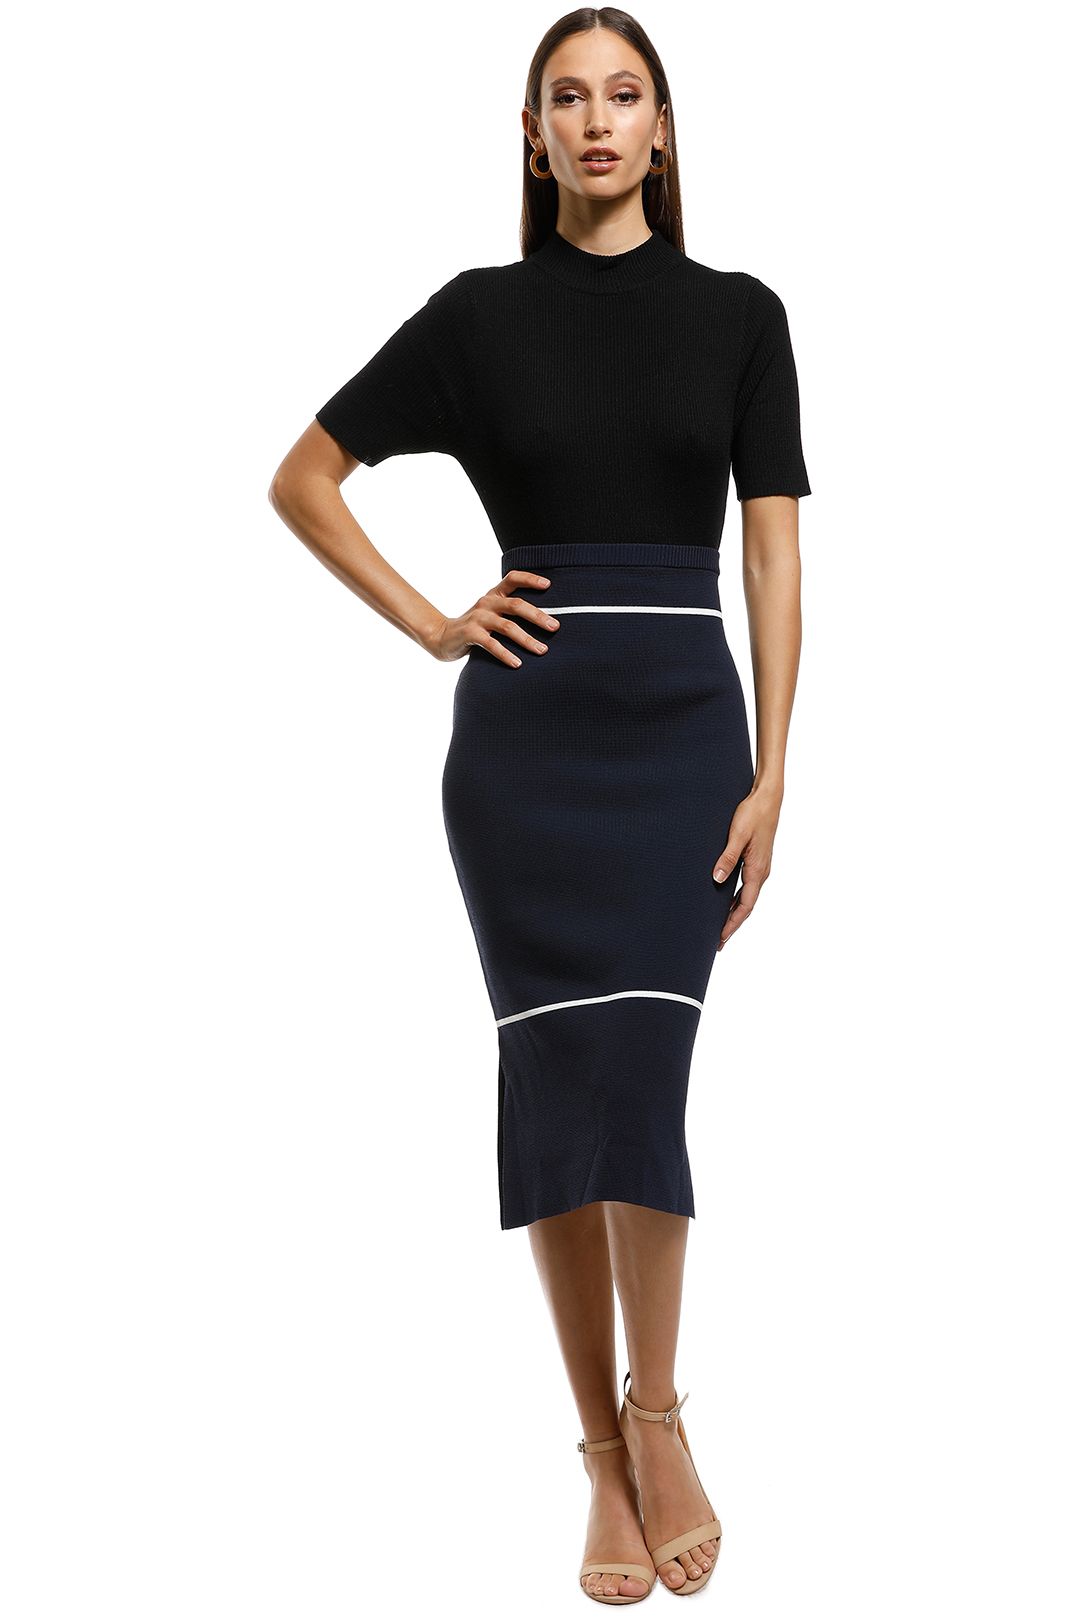 Saints The Label - California Milano Knit Skirt - Navy - Front